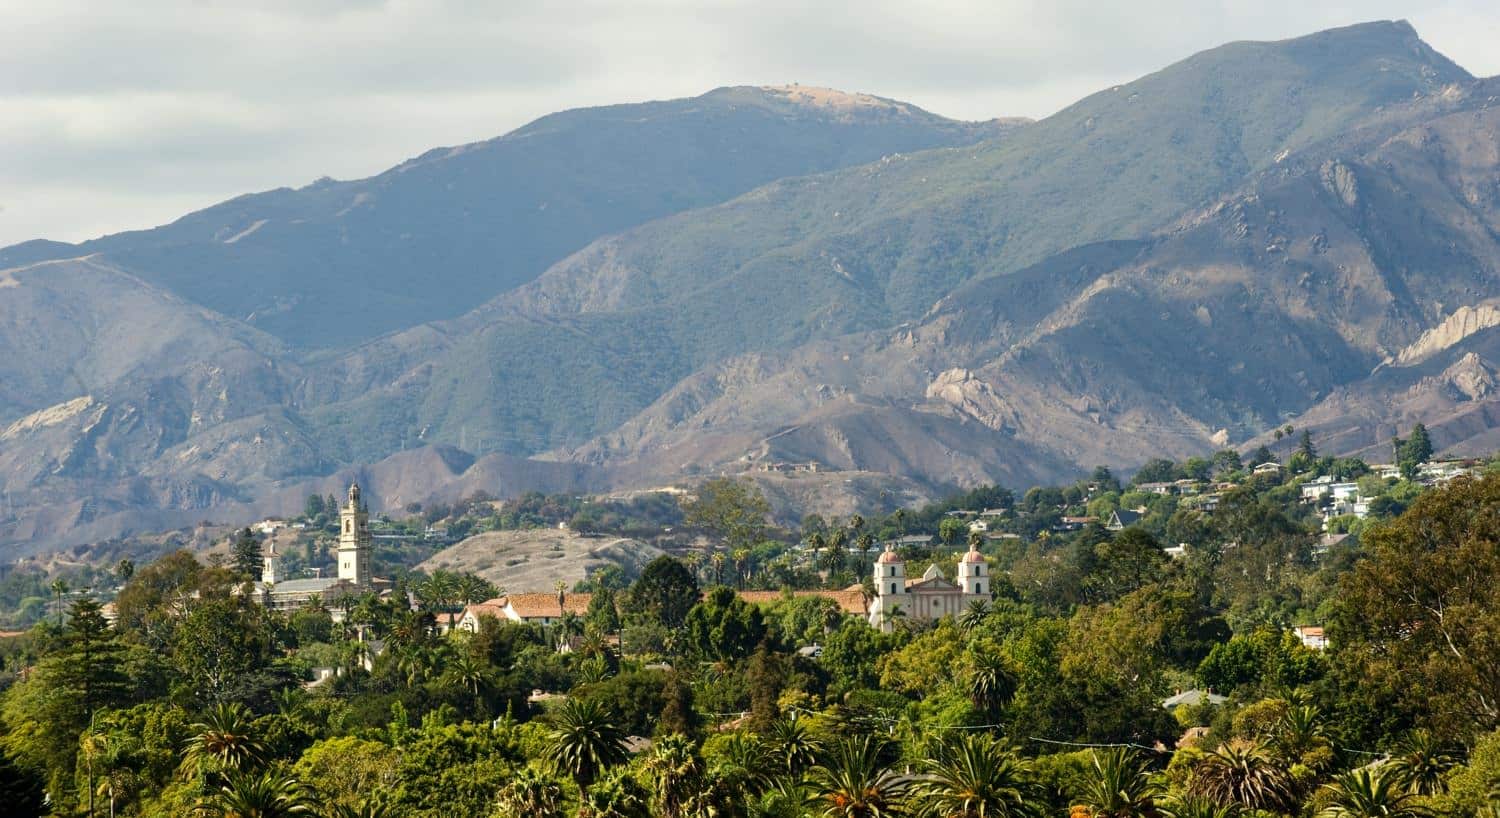 Aerial view of Santa Barbara with tops of buildings peeking through tree tops and mountains in background